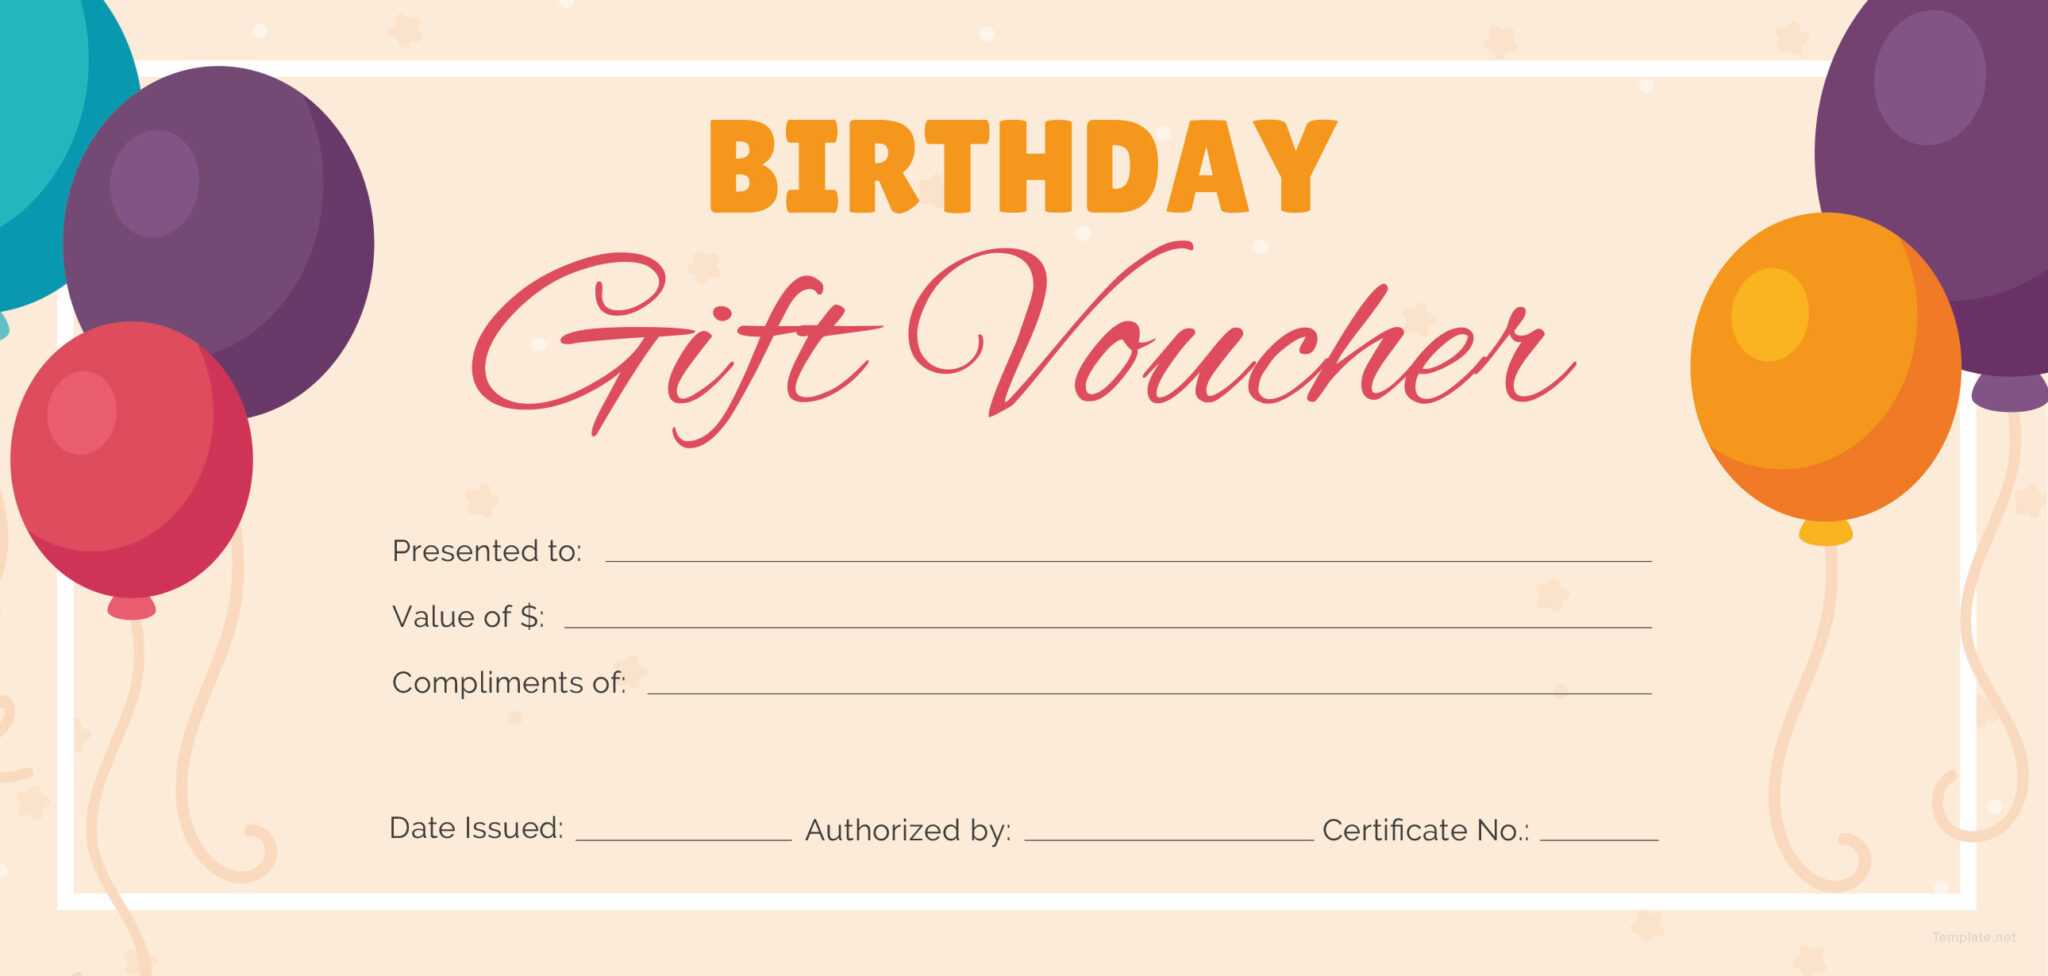 birthday-gift-certificate-template-free-printable-throughout-printable